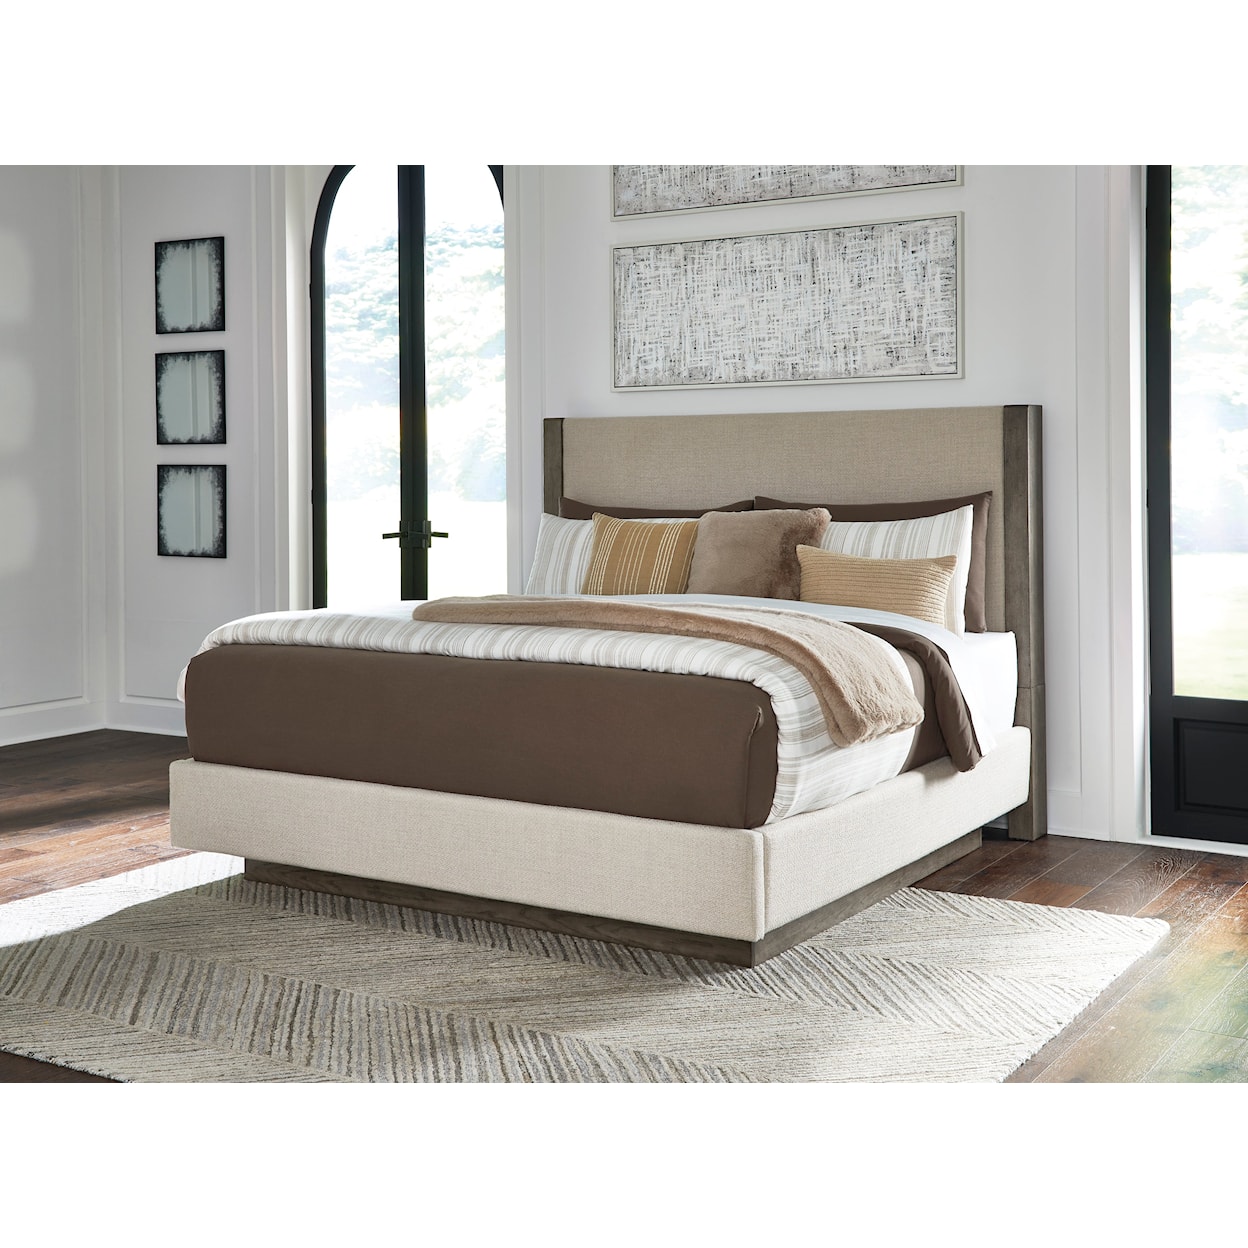 Benchcraft Anibecca Queen Upholstered Bed